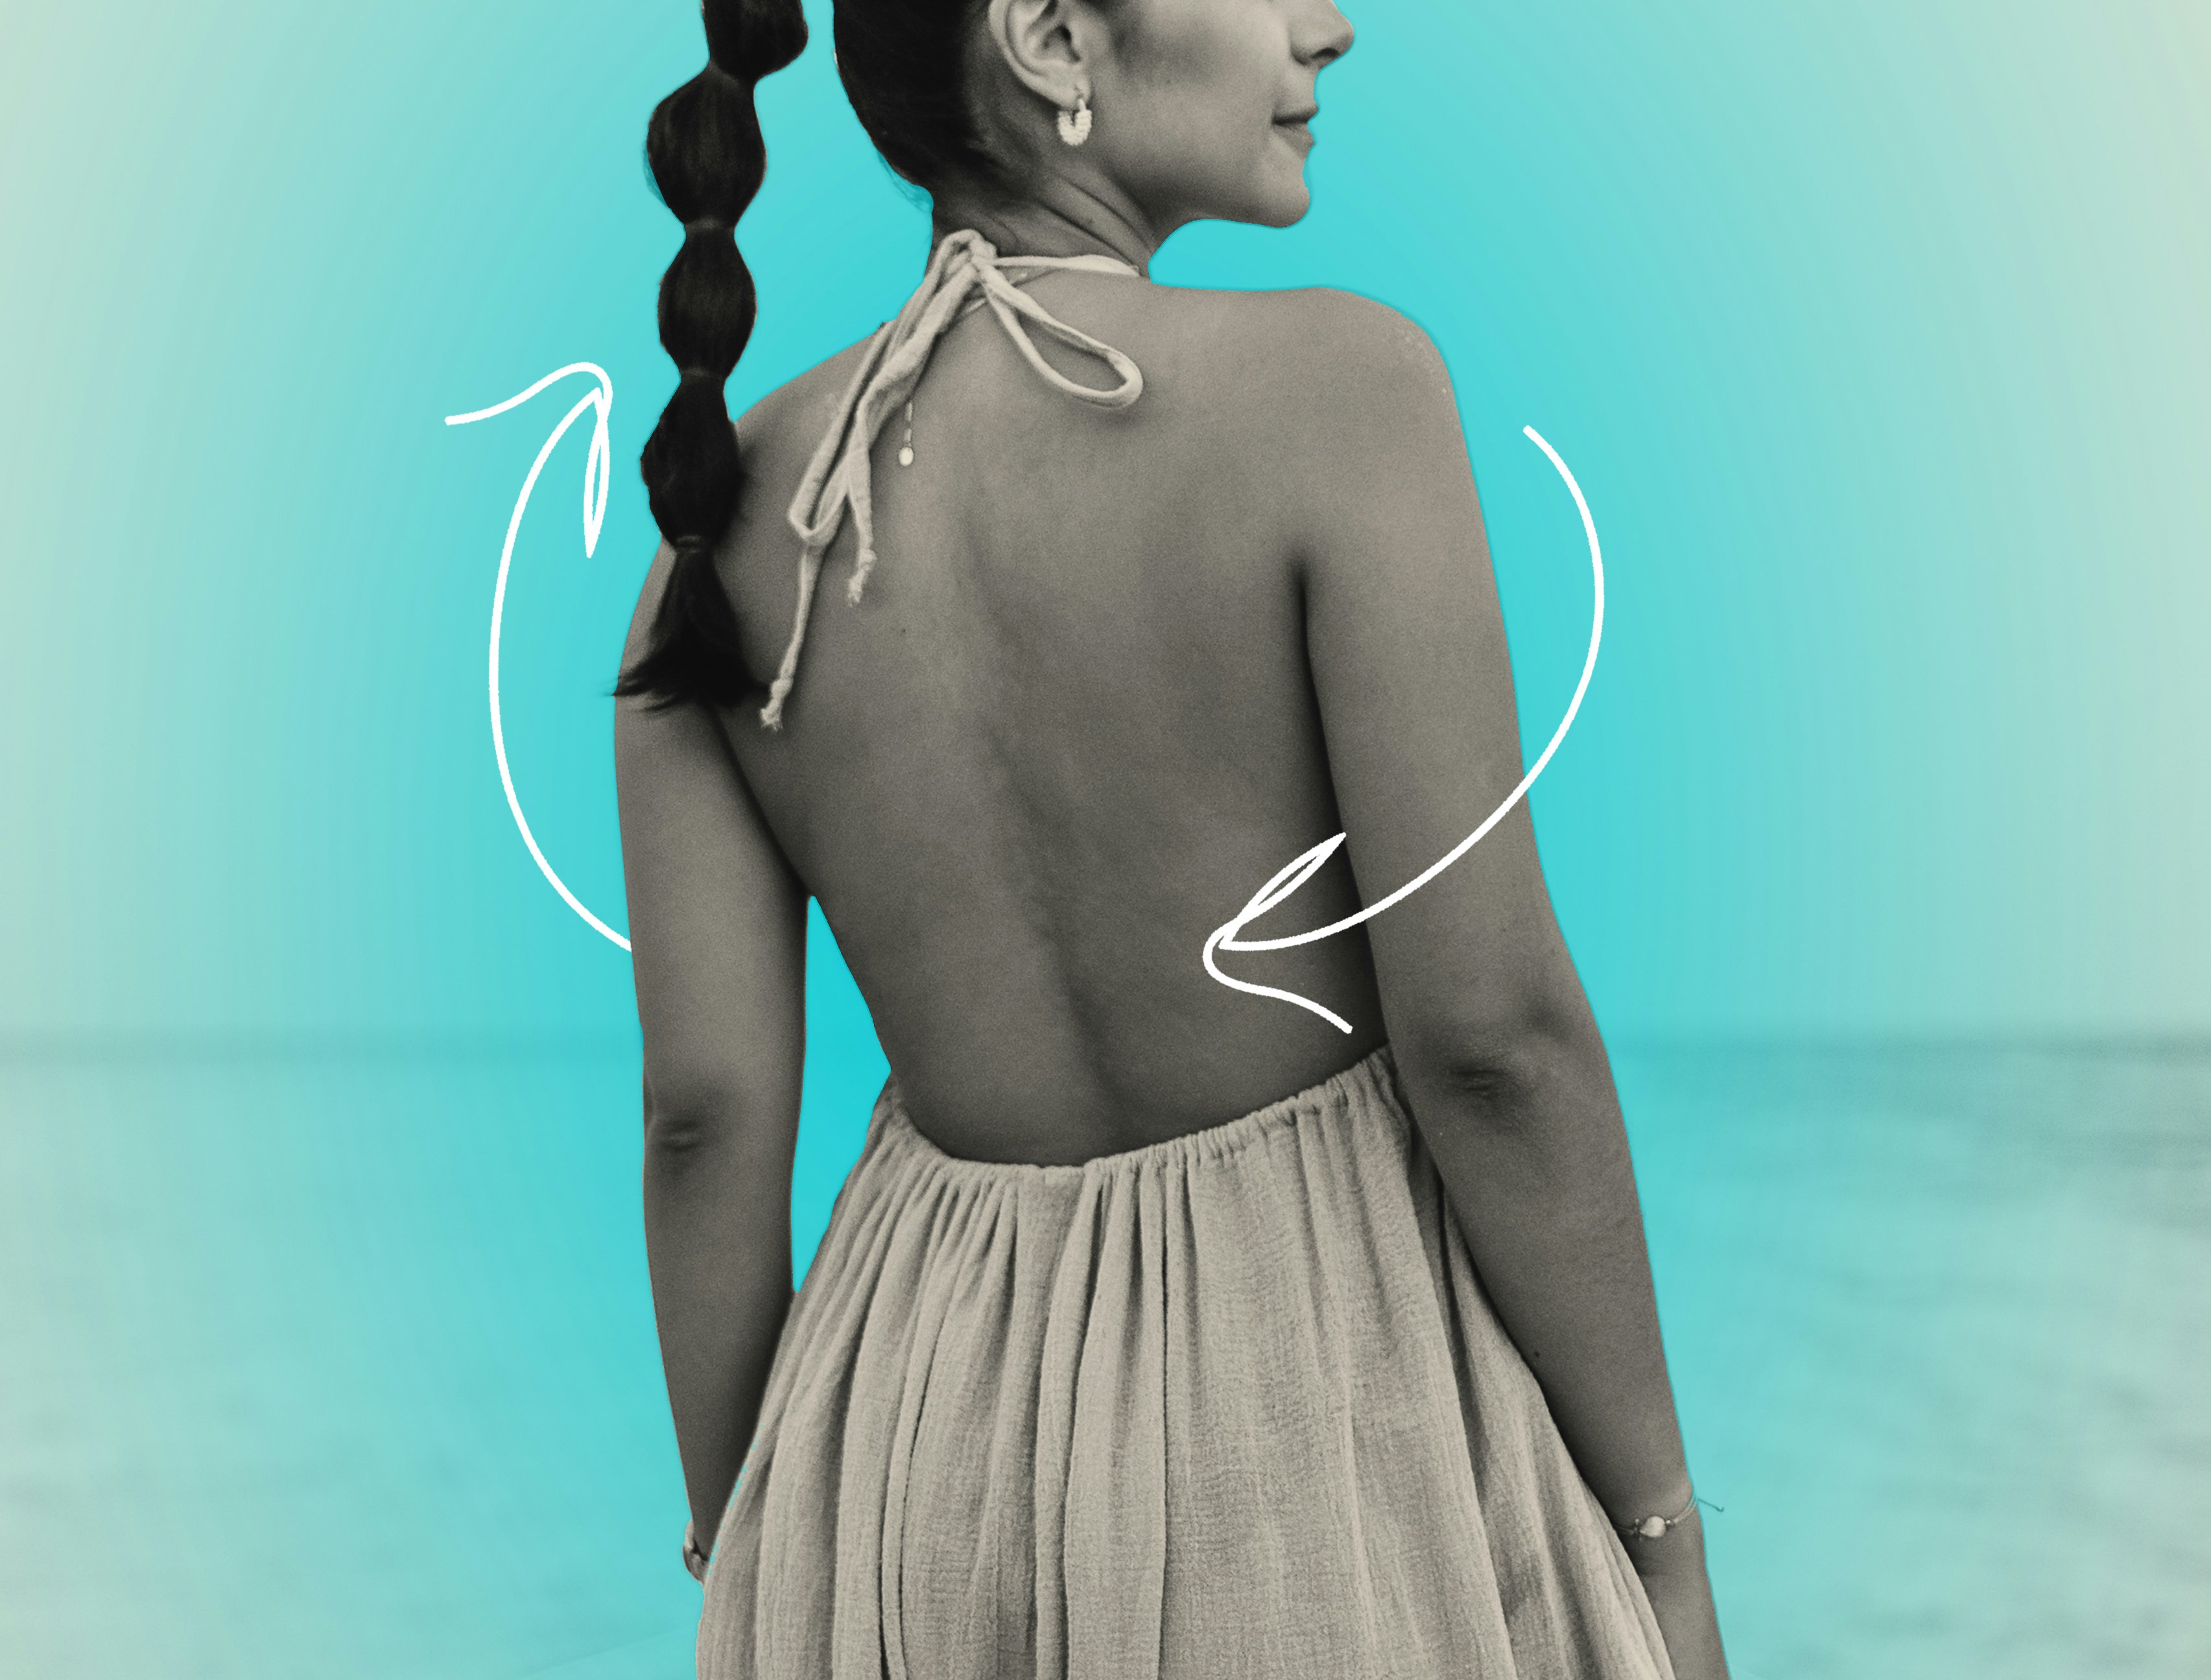 10 Genius Ways To Rock A Backless Dress With Big Boobs